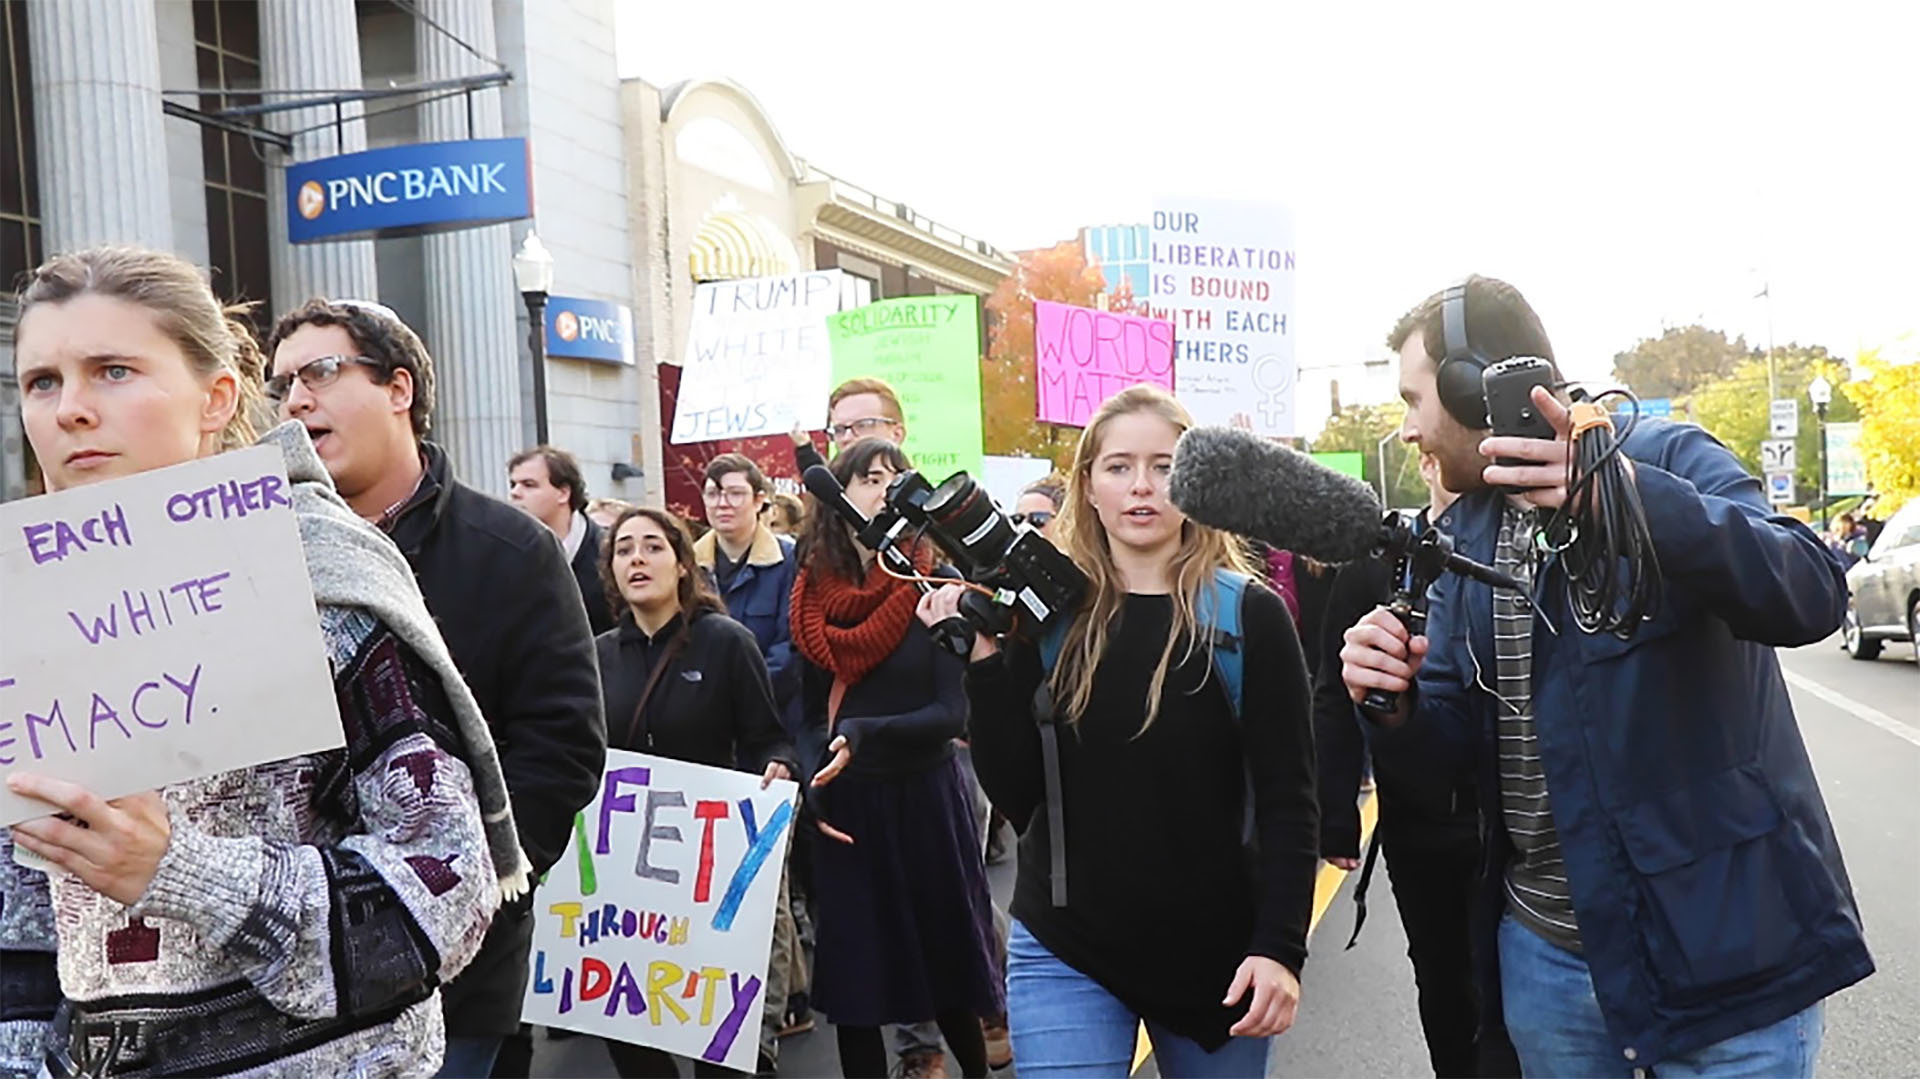 While researching for their senior thesis, Director McKinleigh Lair and Producer Josh Jacobius observed protests in Pittsburgh, PA following the Tree of Life synagogue shooting.